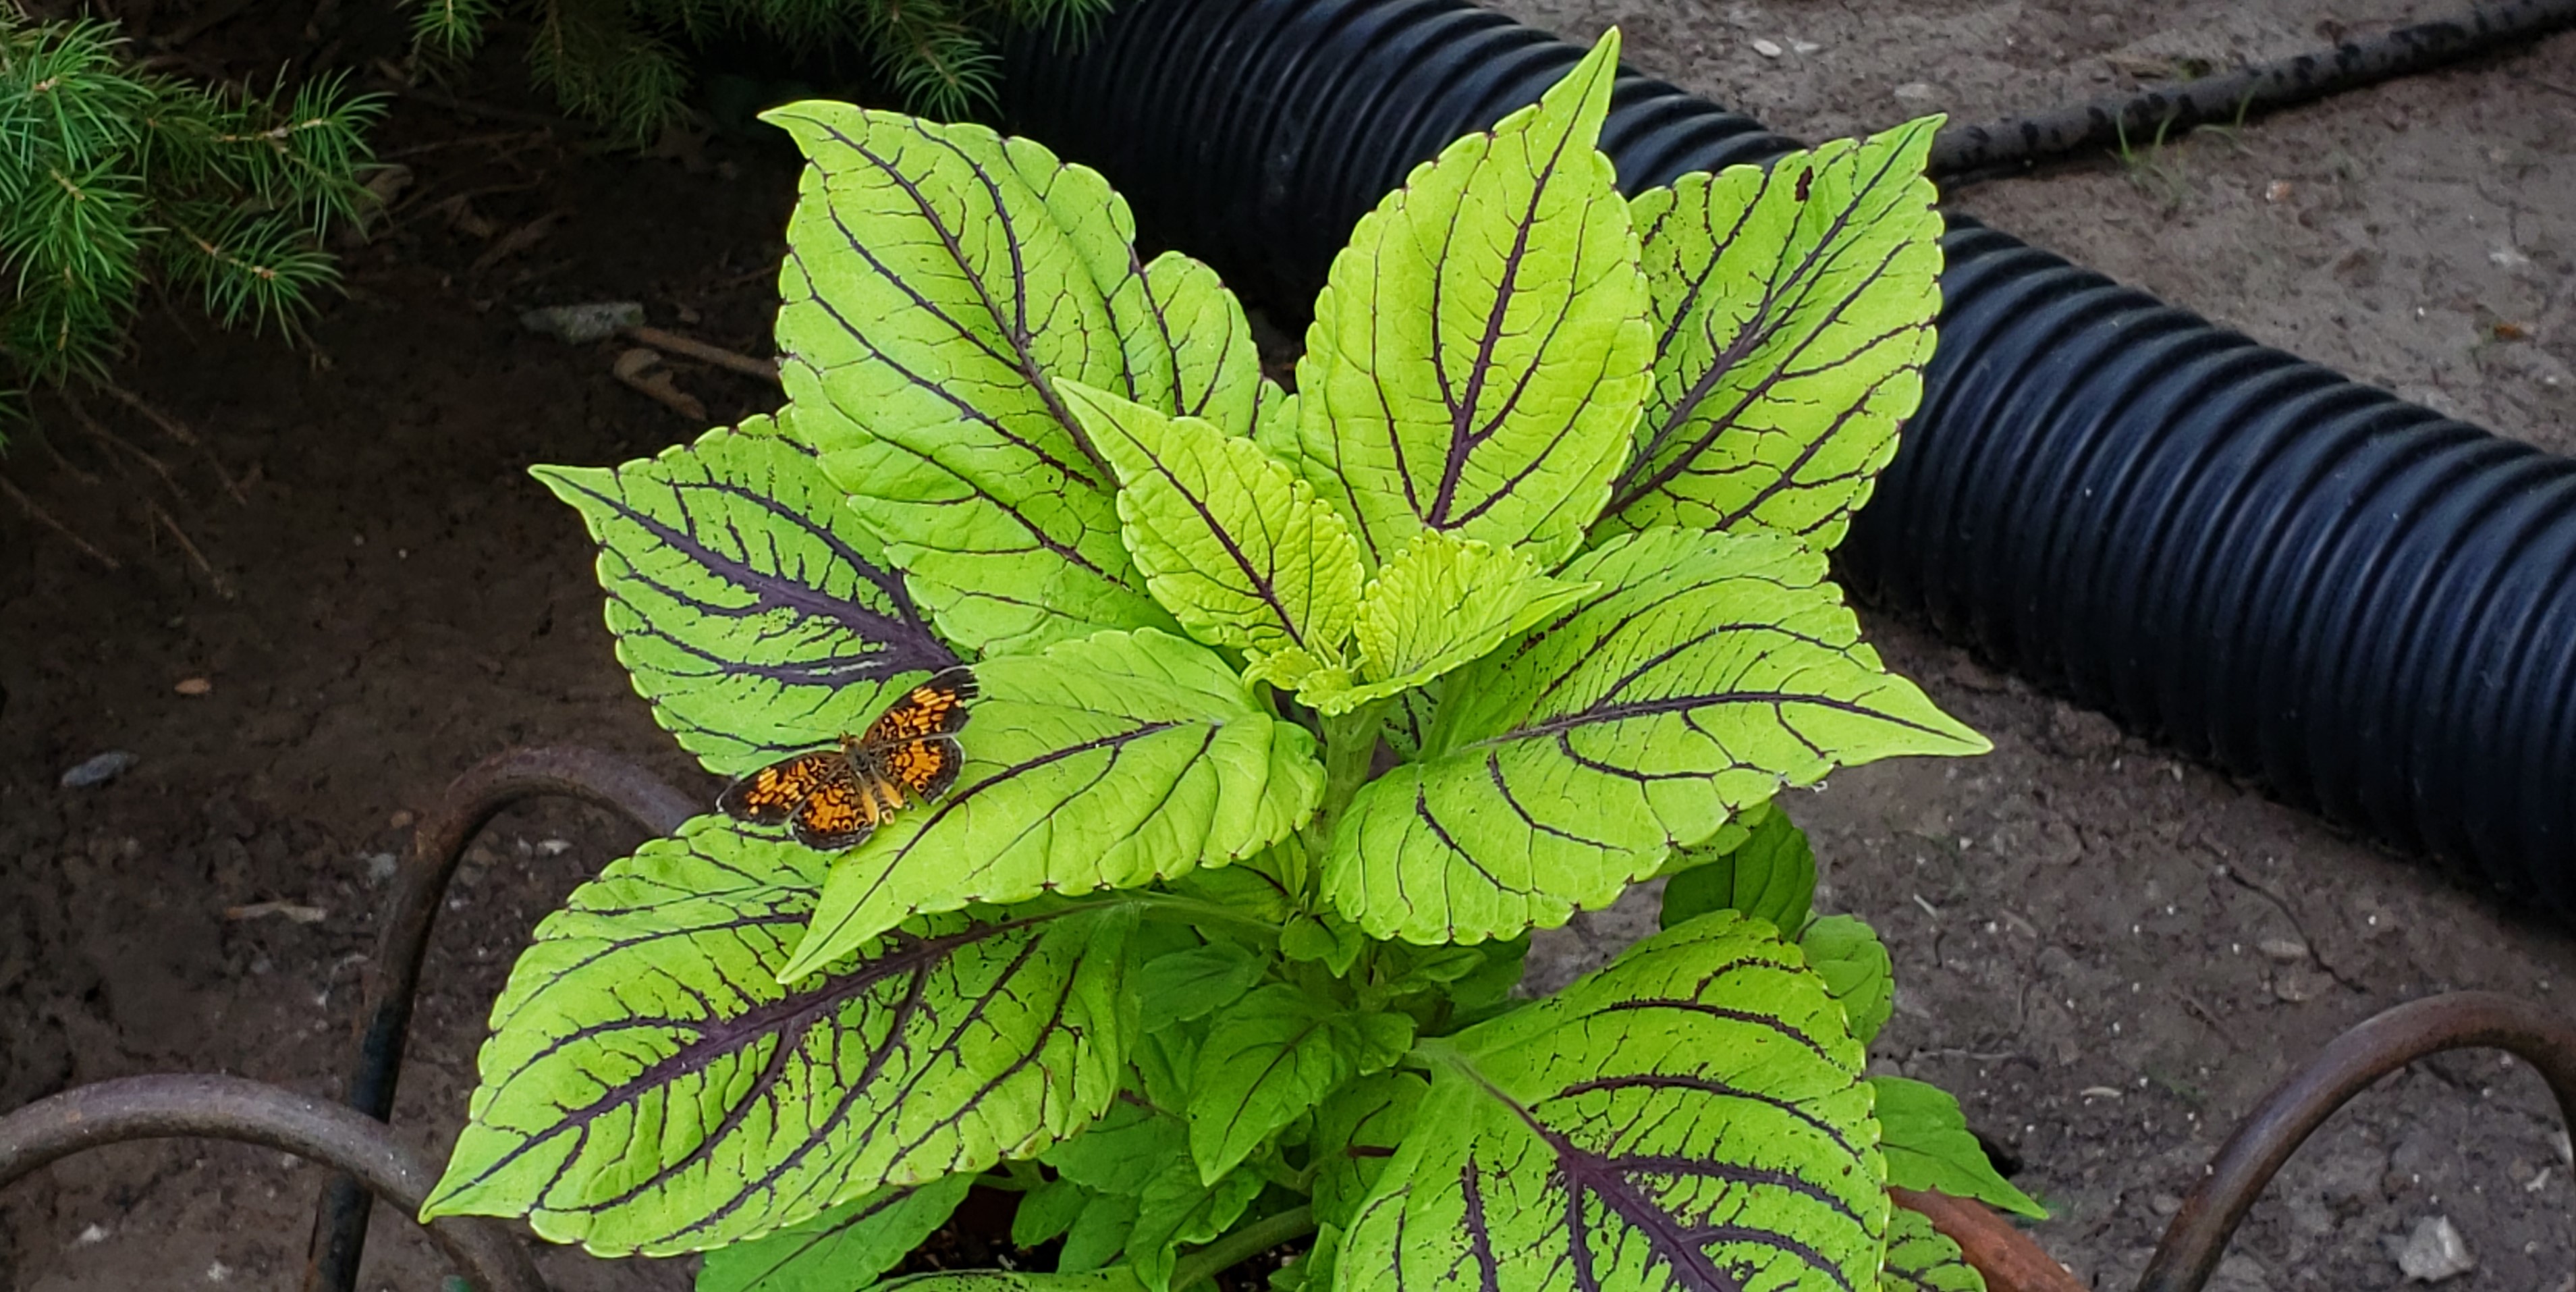 a copper (butterfly) rests on a coleus (plant)